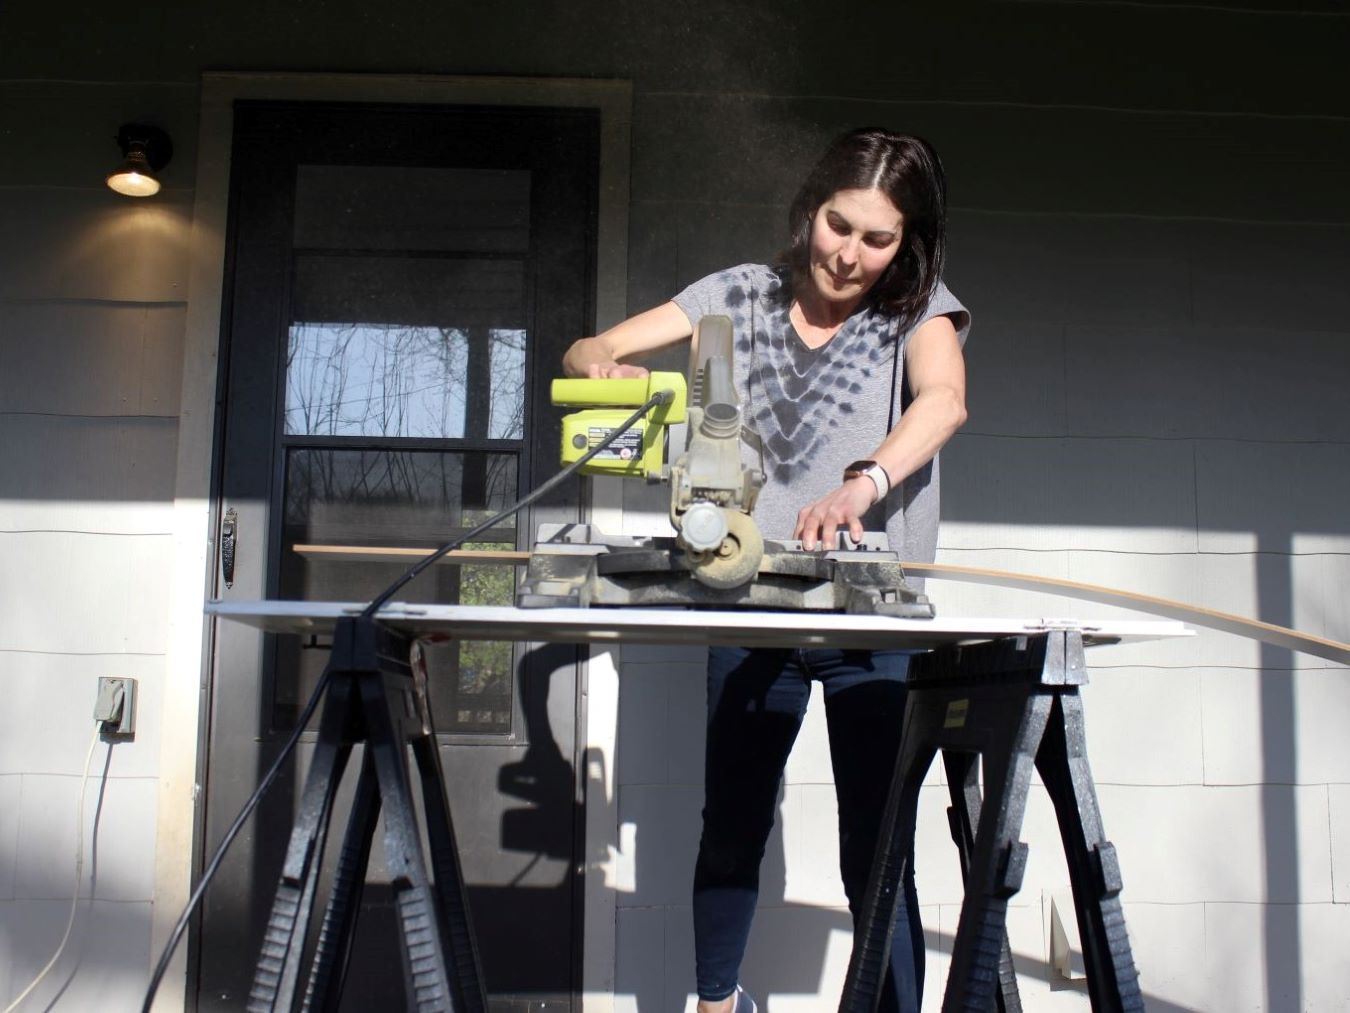 Former Springfield teacher Stephanie Reid works with a miter saw outside her vacation rental home.